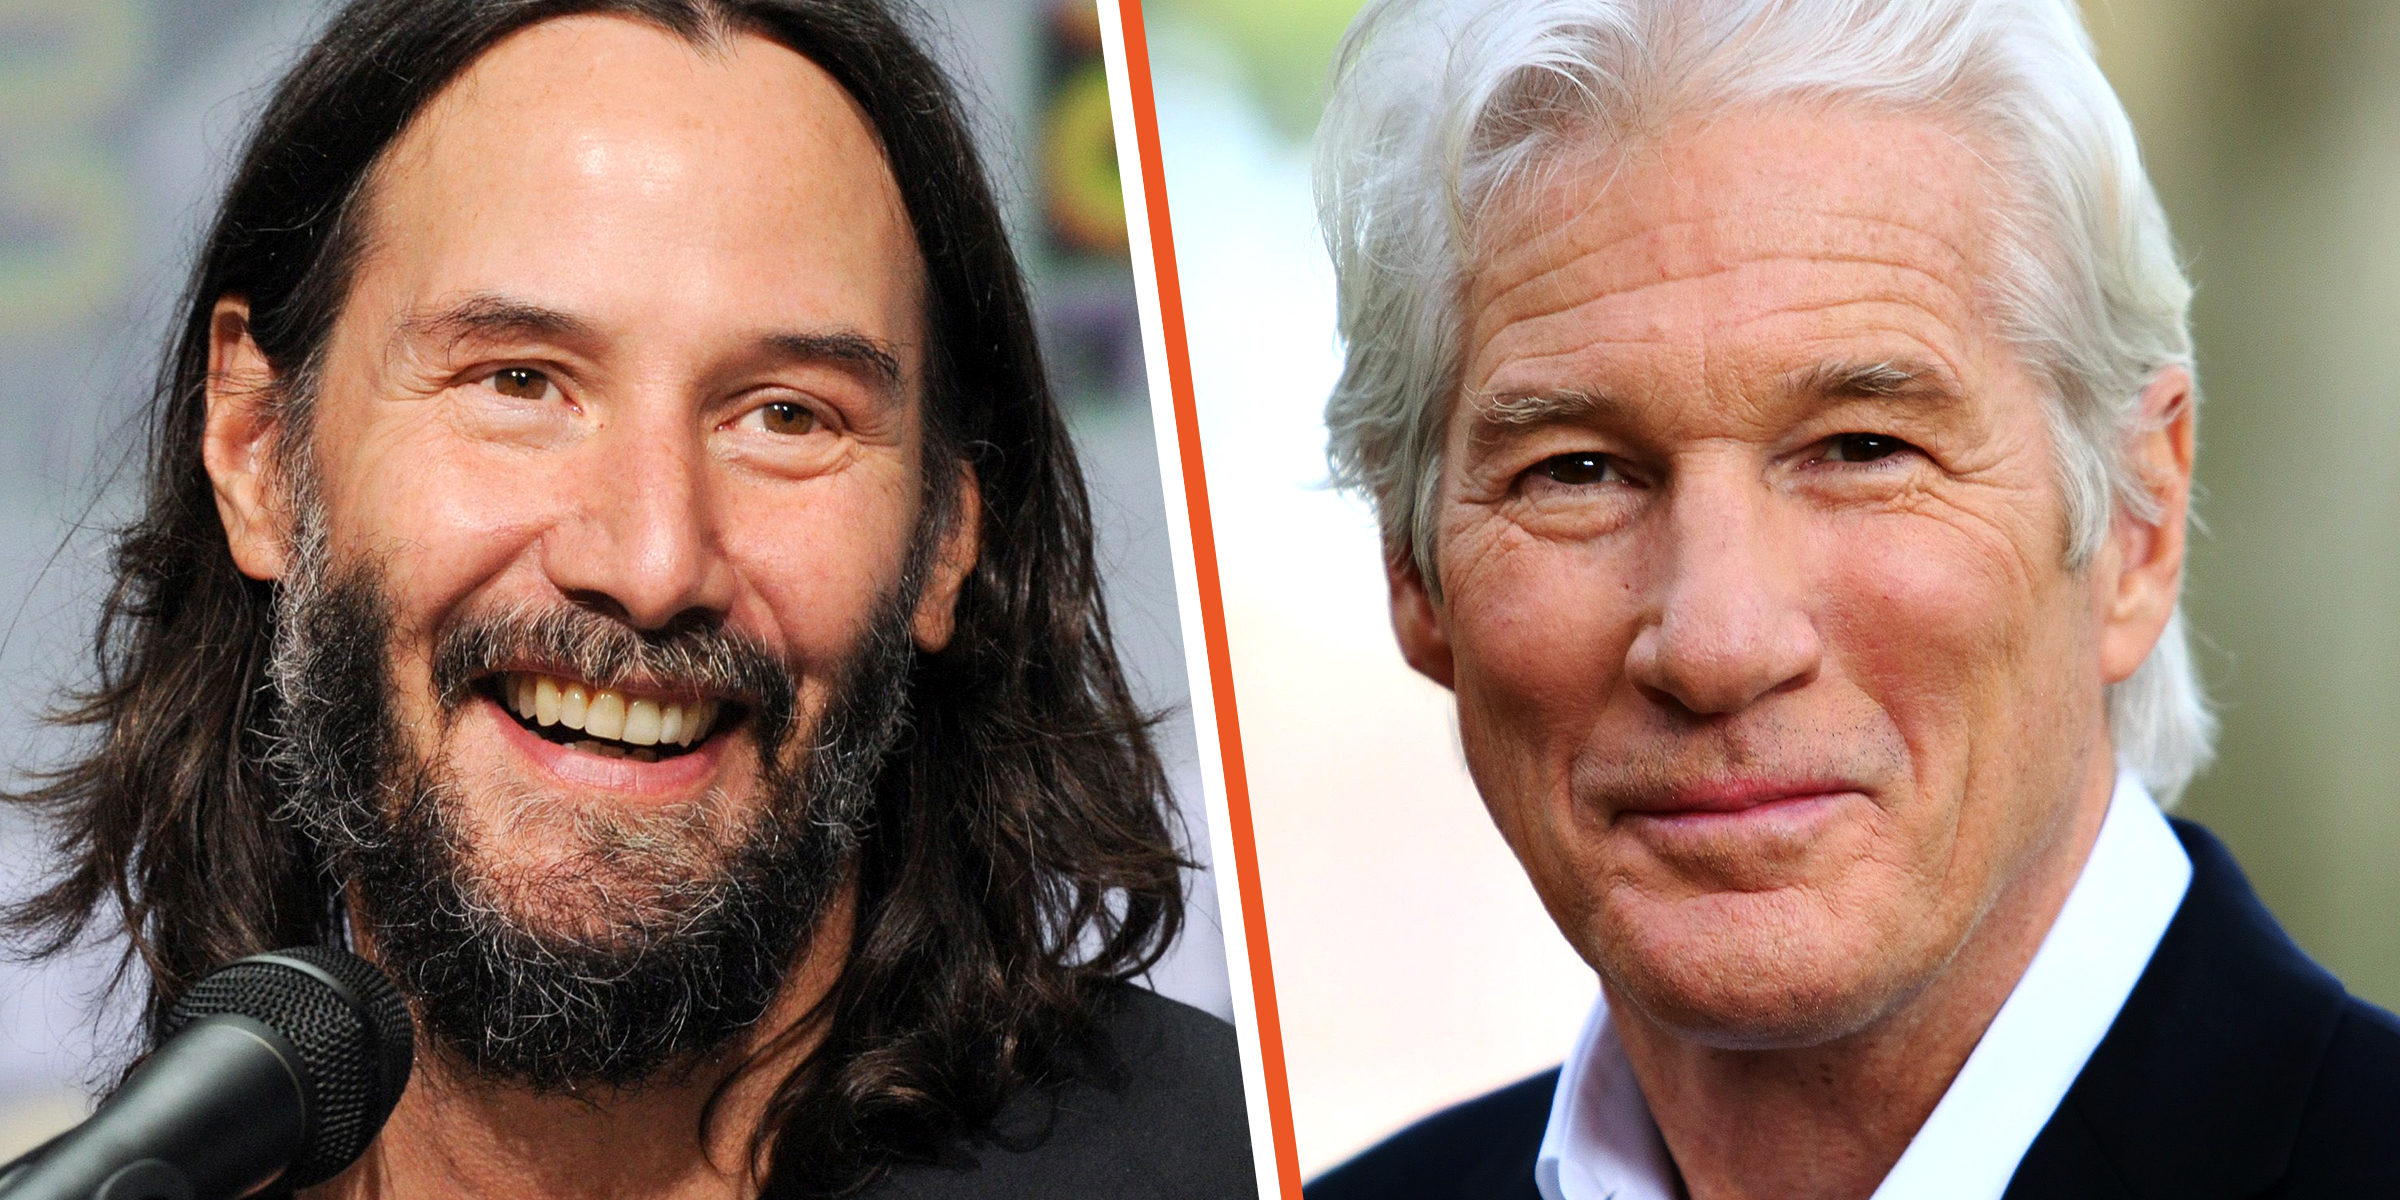 Keanu Reeves | Richard Gere | Sources: Getty Images